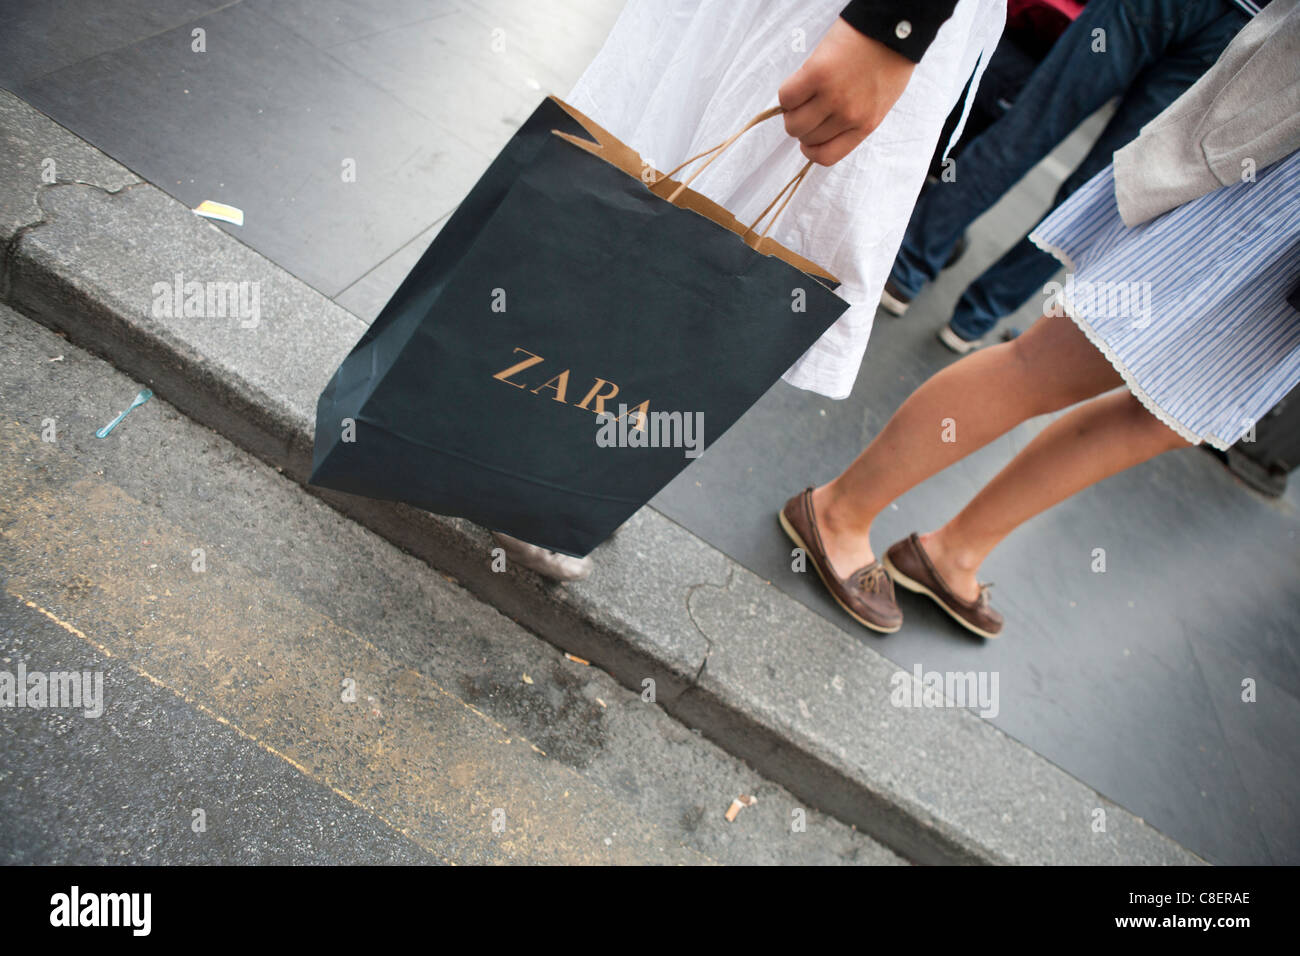 person walking with Zara shopping bag in city town low section Stock Photo  - Alamy